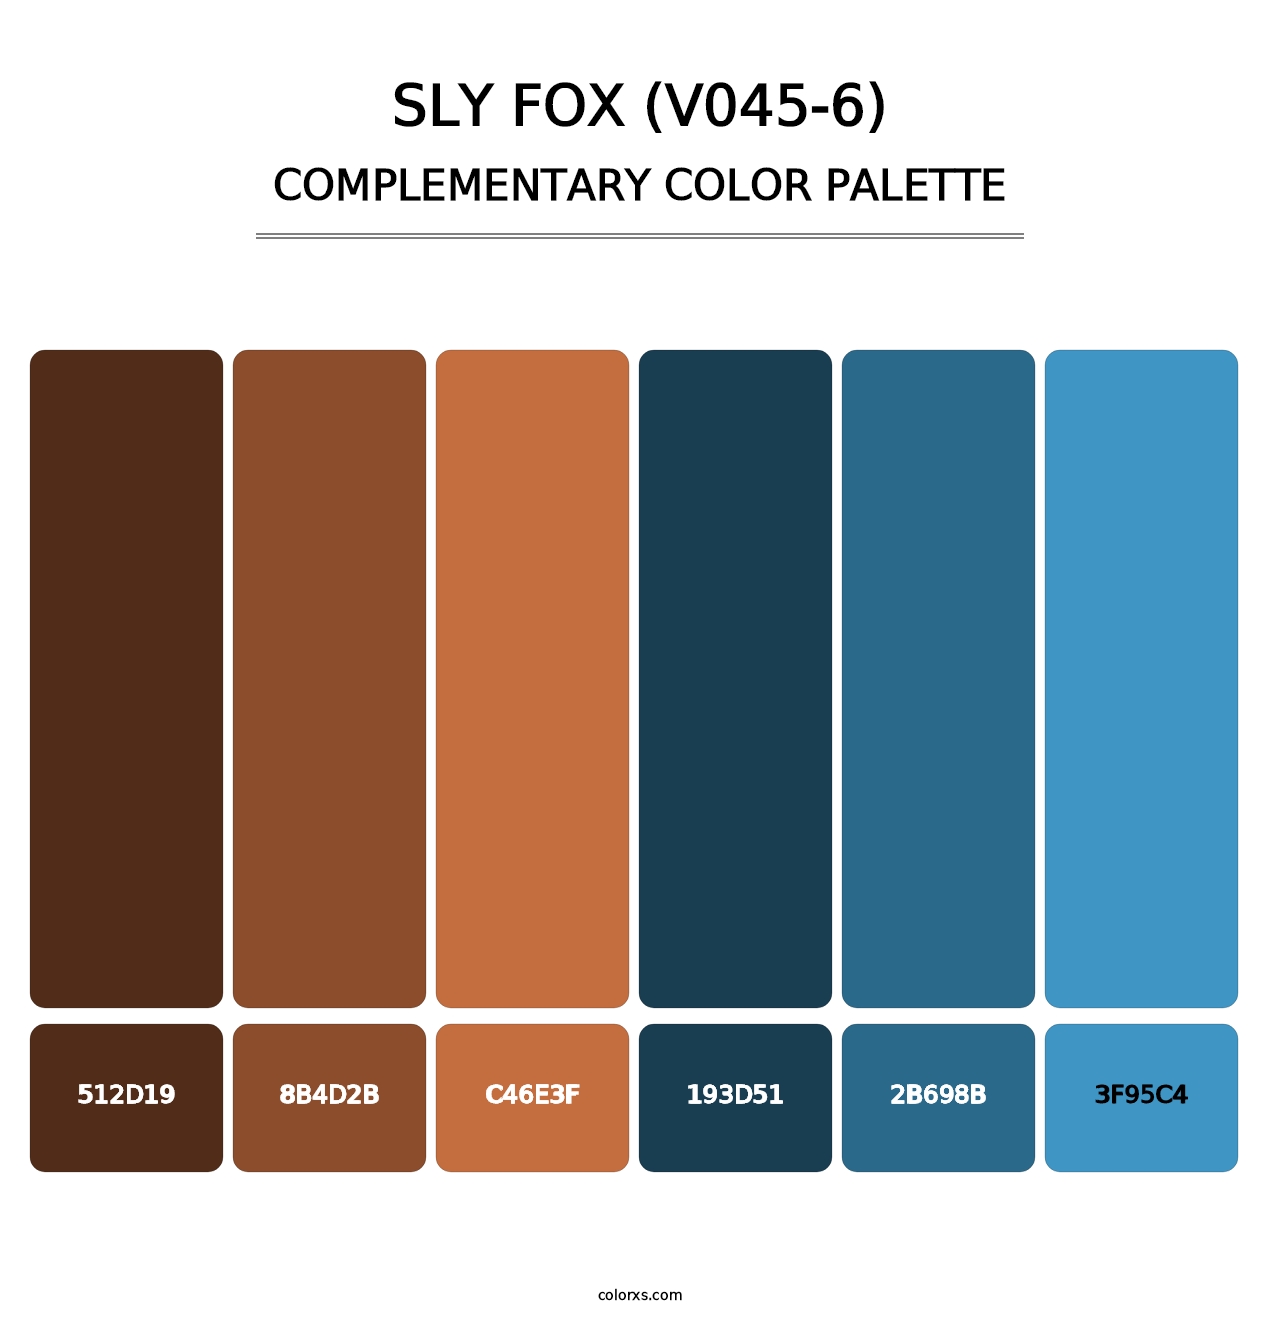 Sly Fox (V045-6) - Complementary Color Palette